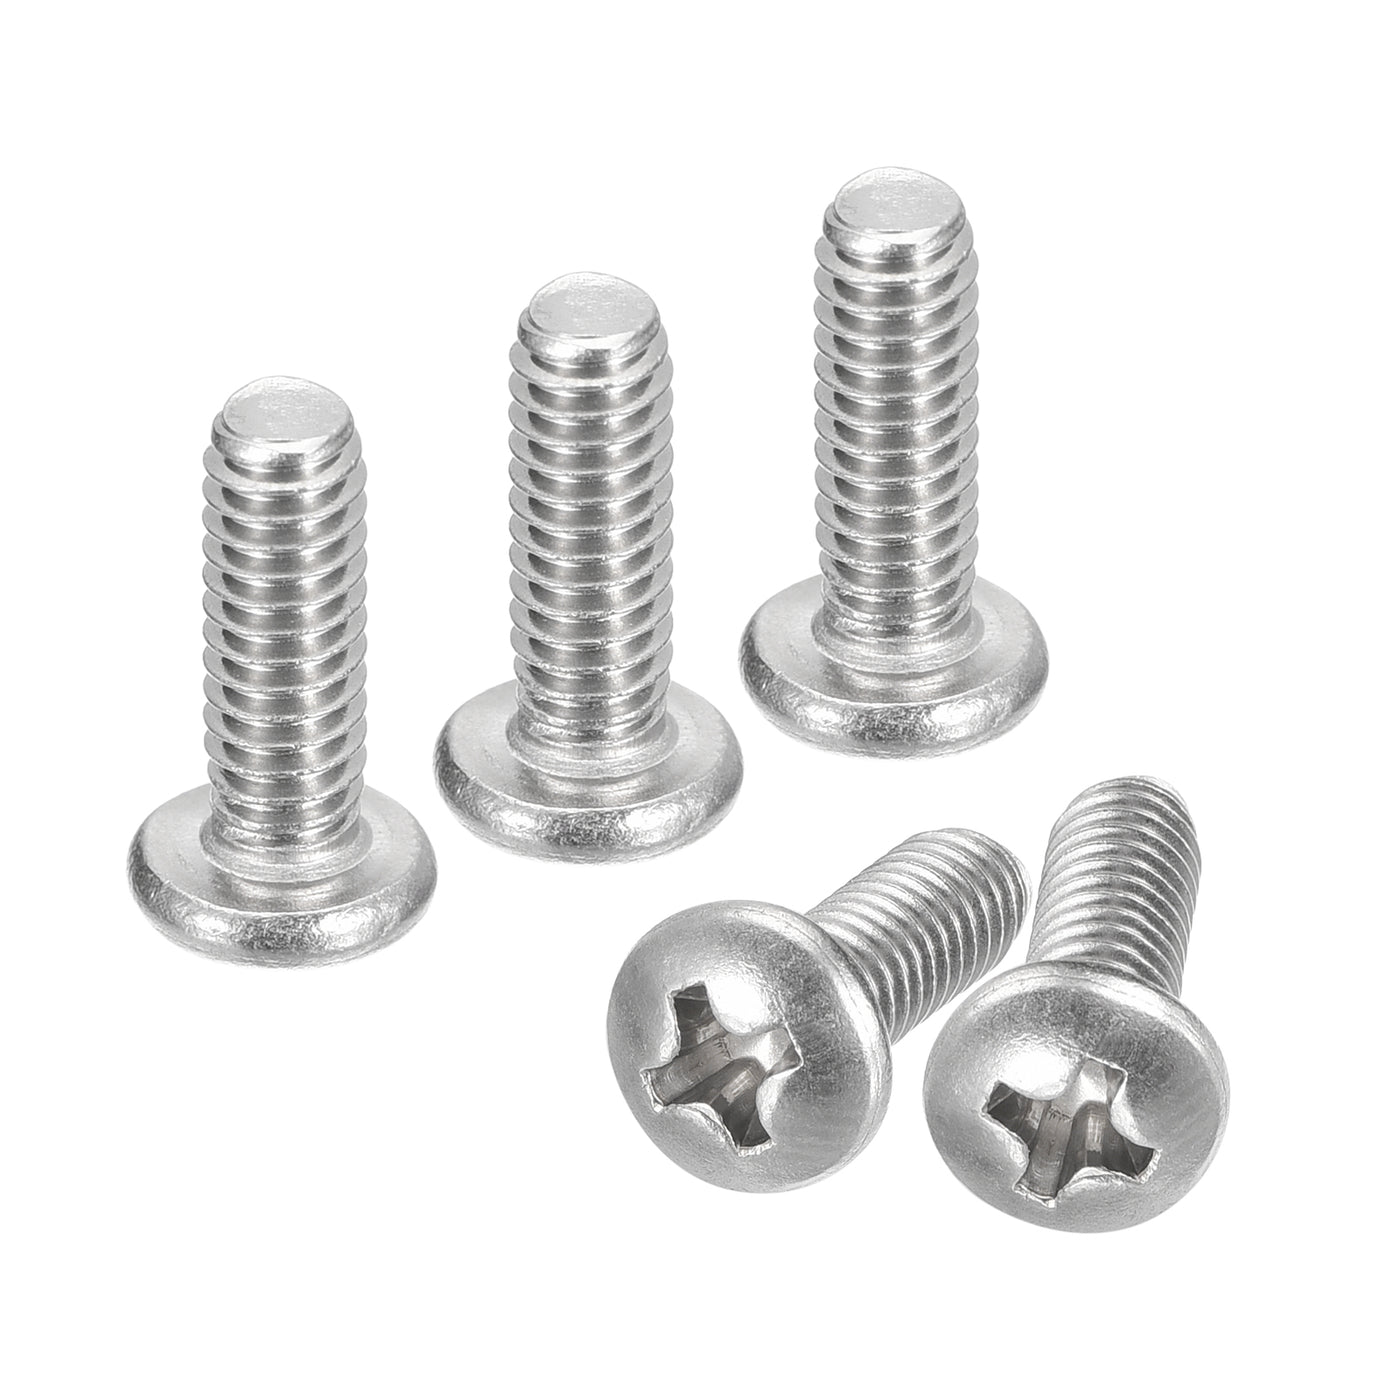 uxcell Uxcell #8-32x1/2" Pan Head Machine Screws, Stainless Steel 18-8 Screw, Pack of 100